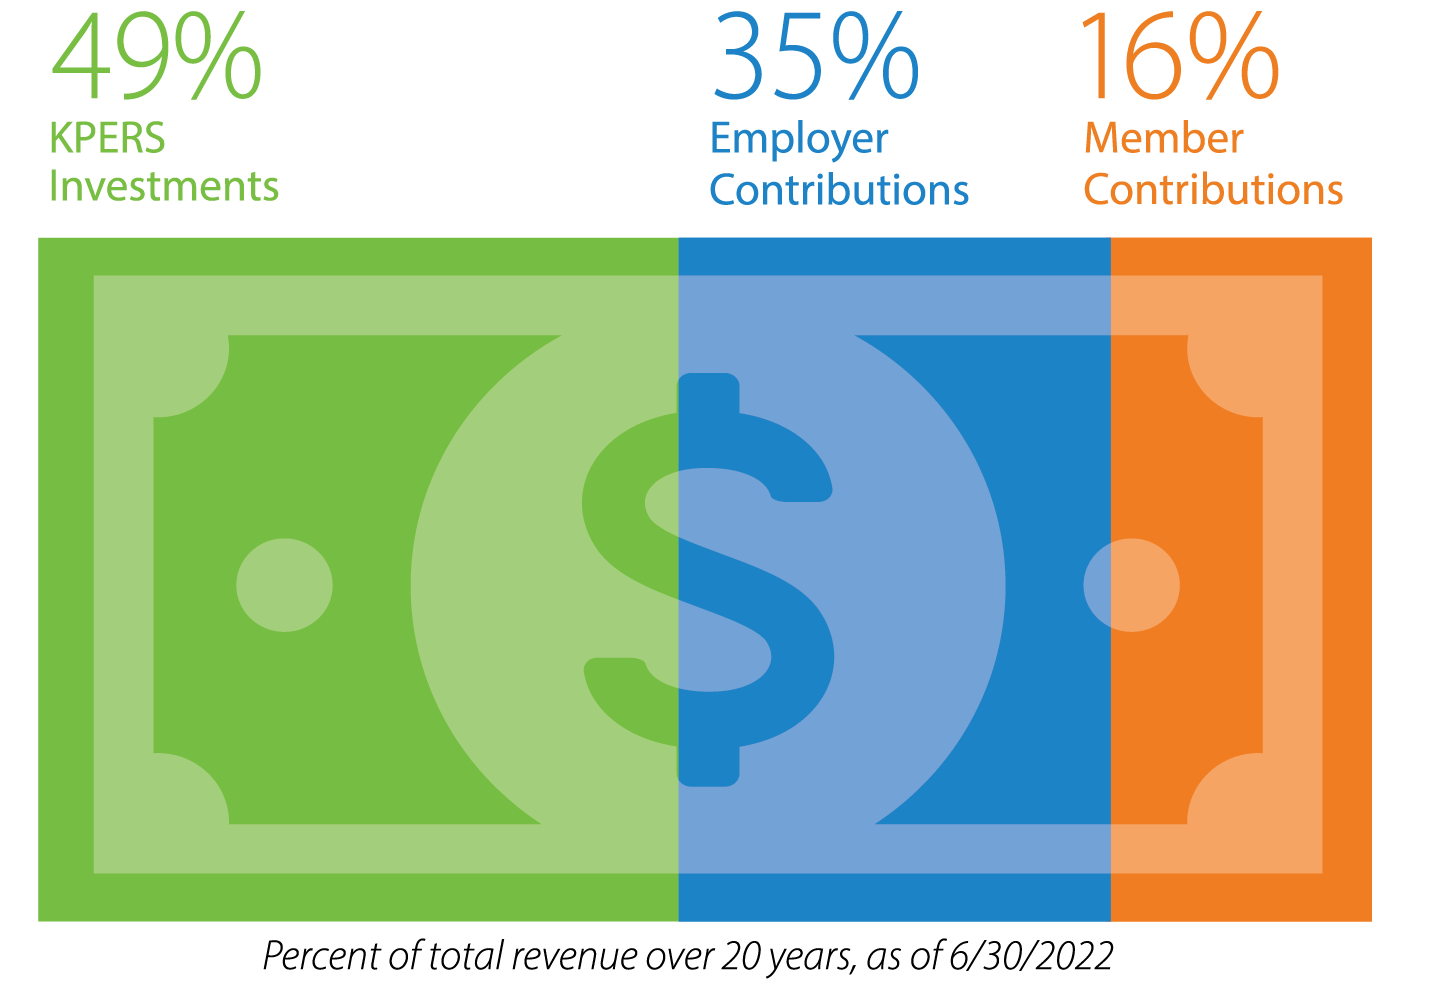 dollar bill graphic that shows member contributions: 17%, employee contributions: 36% and KPERS Investments: 47%